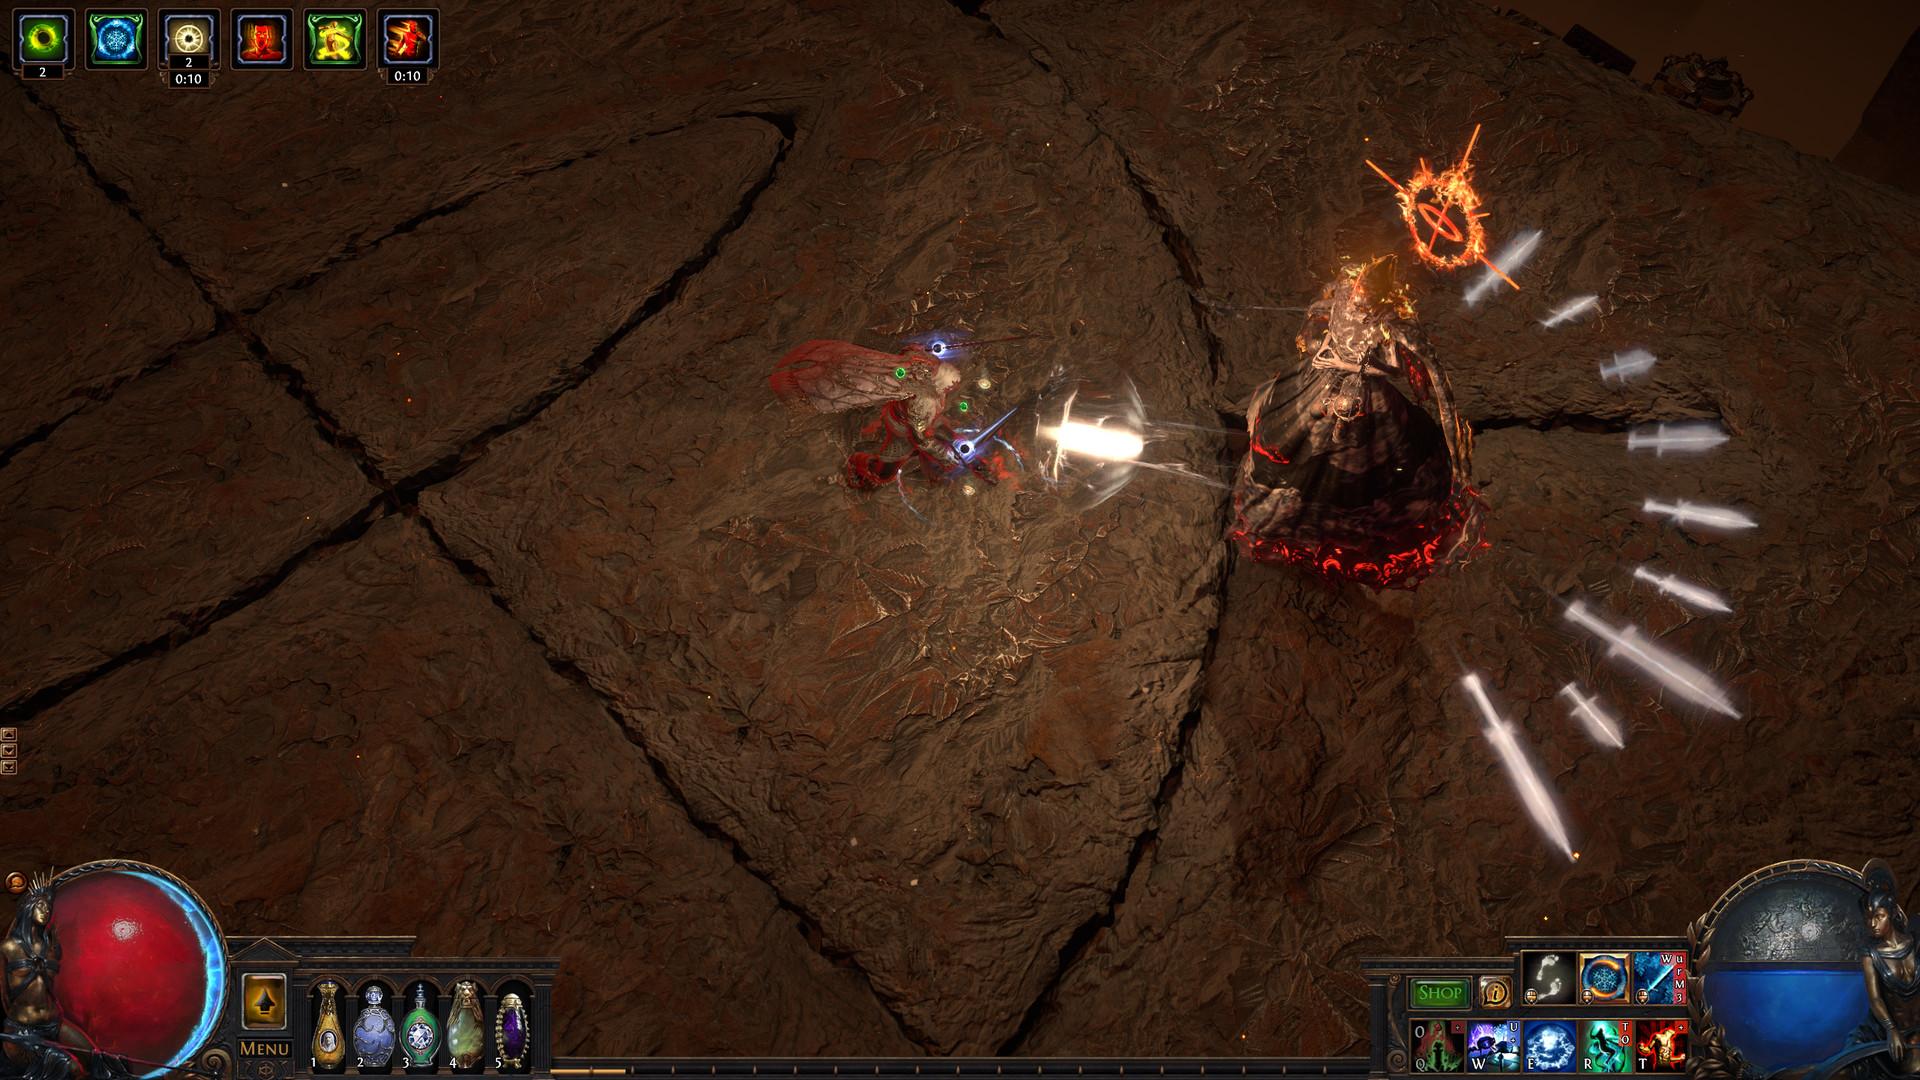 Screenshot №6 from game Path of Exile